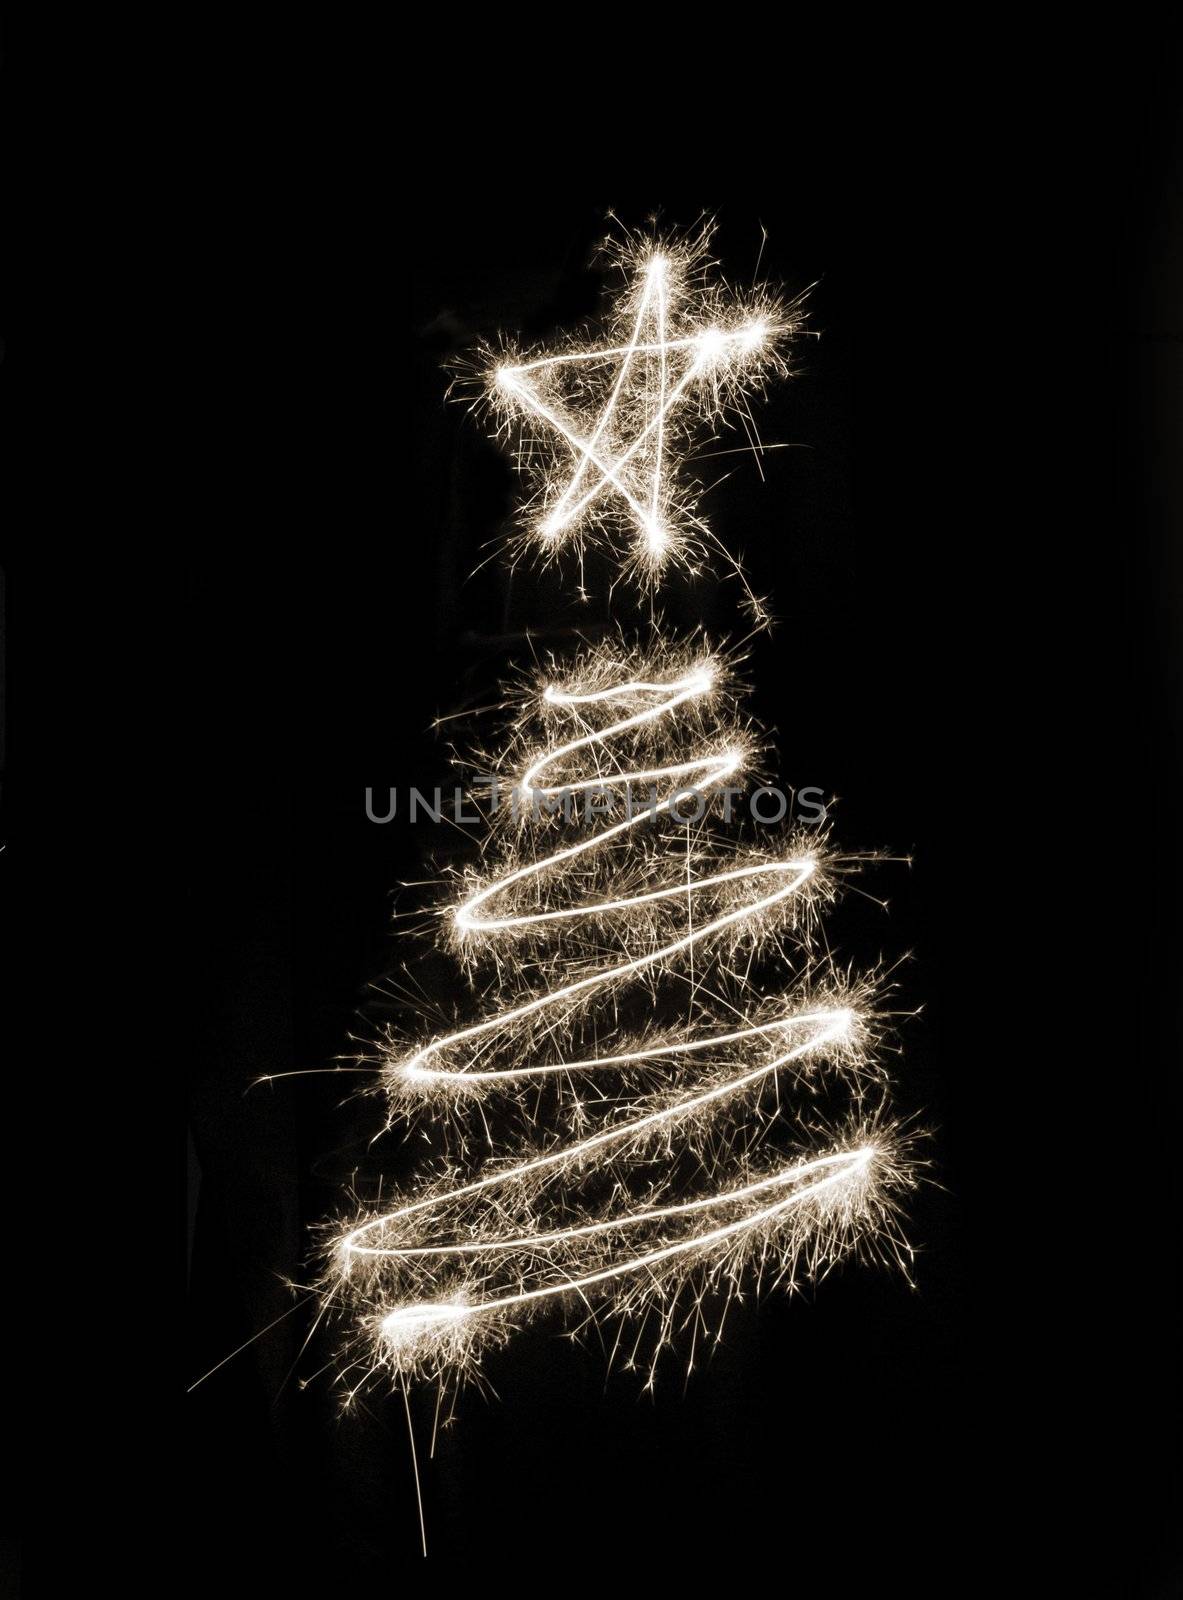 A christmas tree symbol drawn in sparkler trails